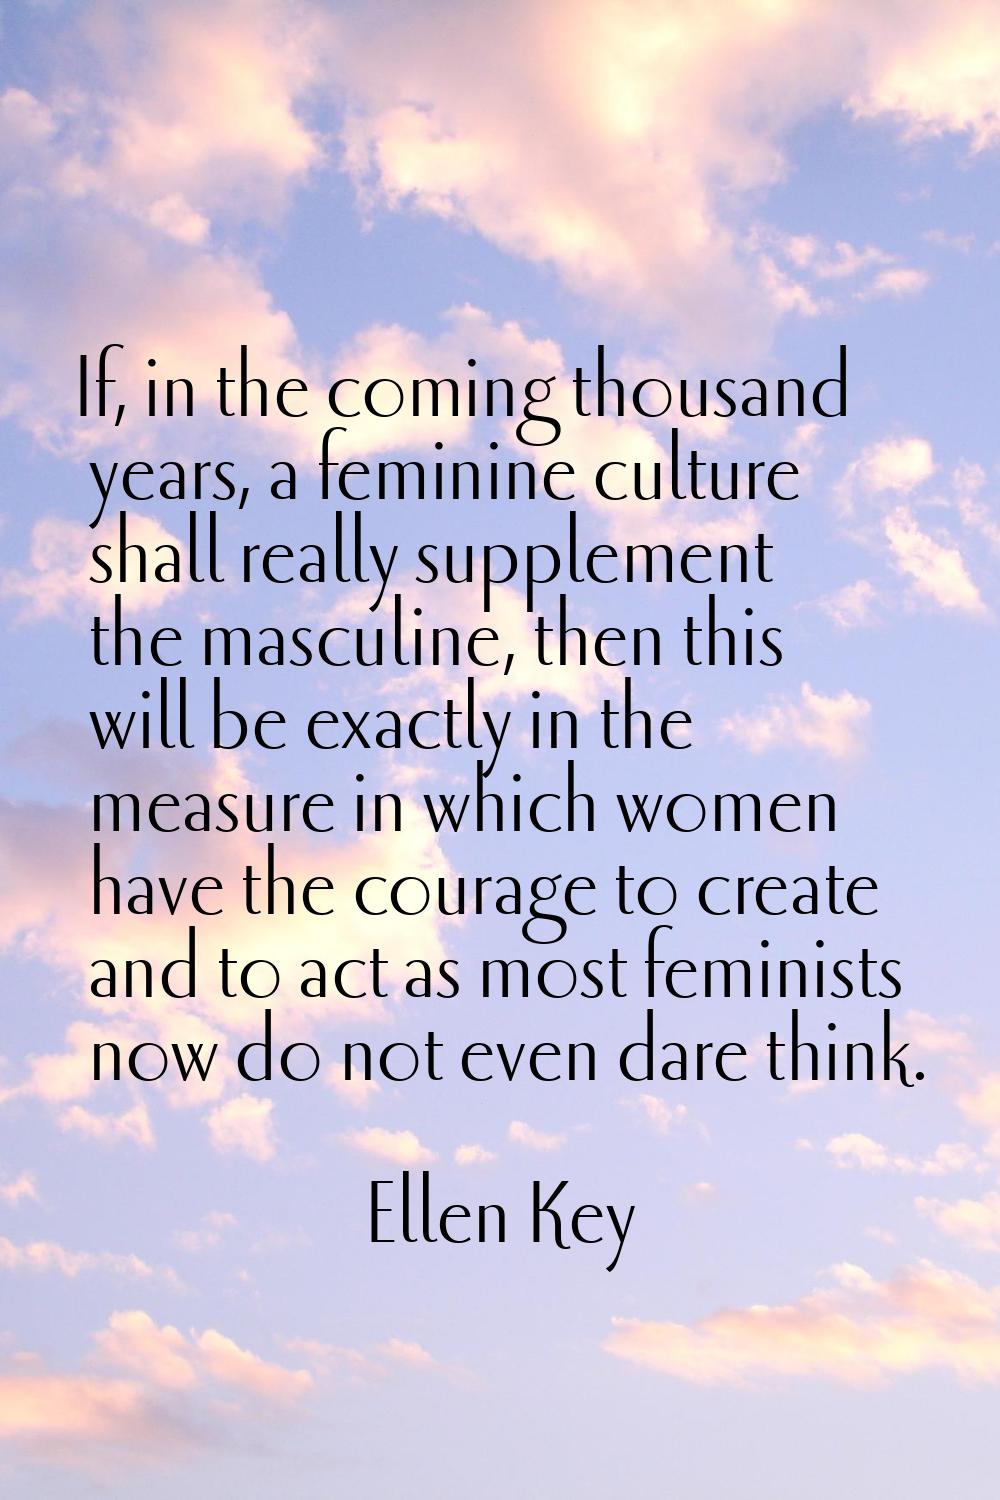 If, in the coming thousand years, a feminine culture shall really supplement the masculine, then th